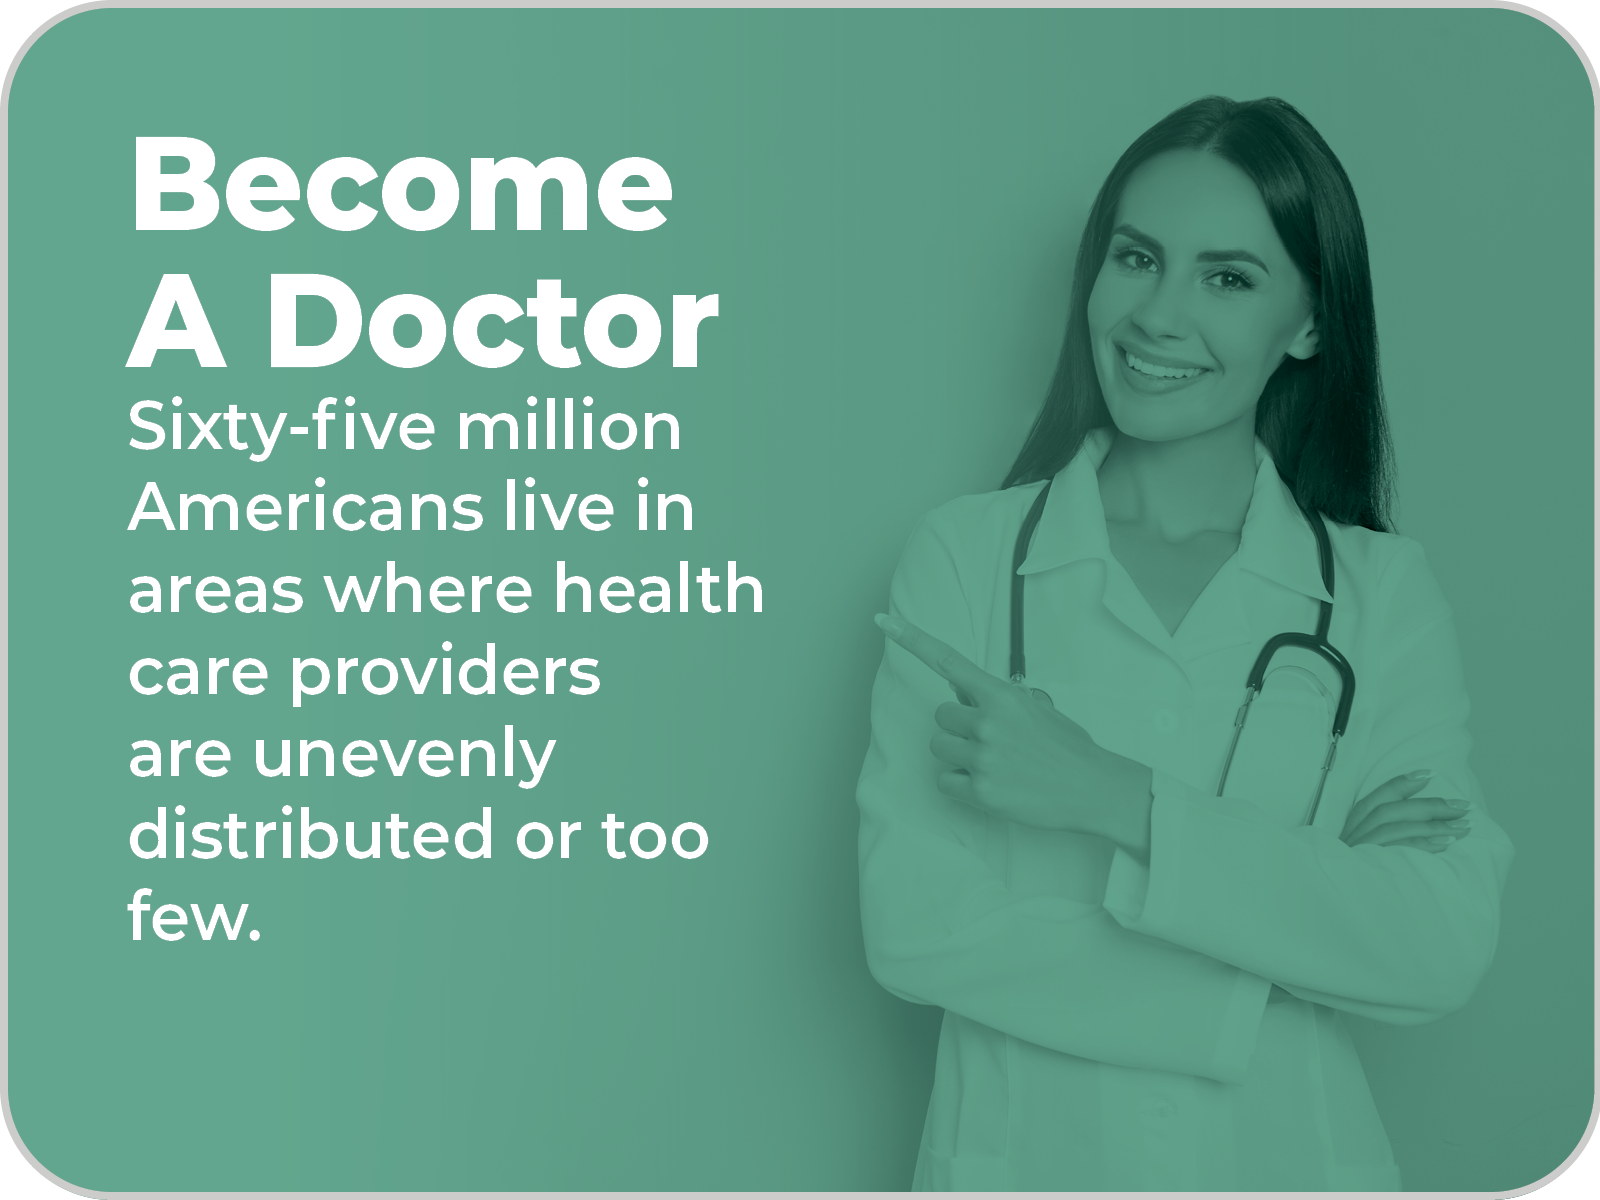 Green box with image of a woman doctor pointing to the words "Become a Doctor"